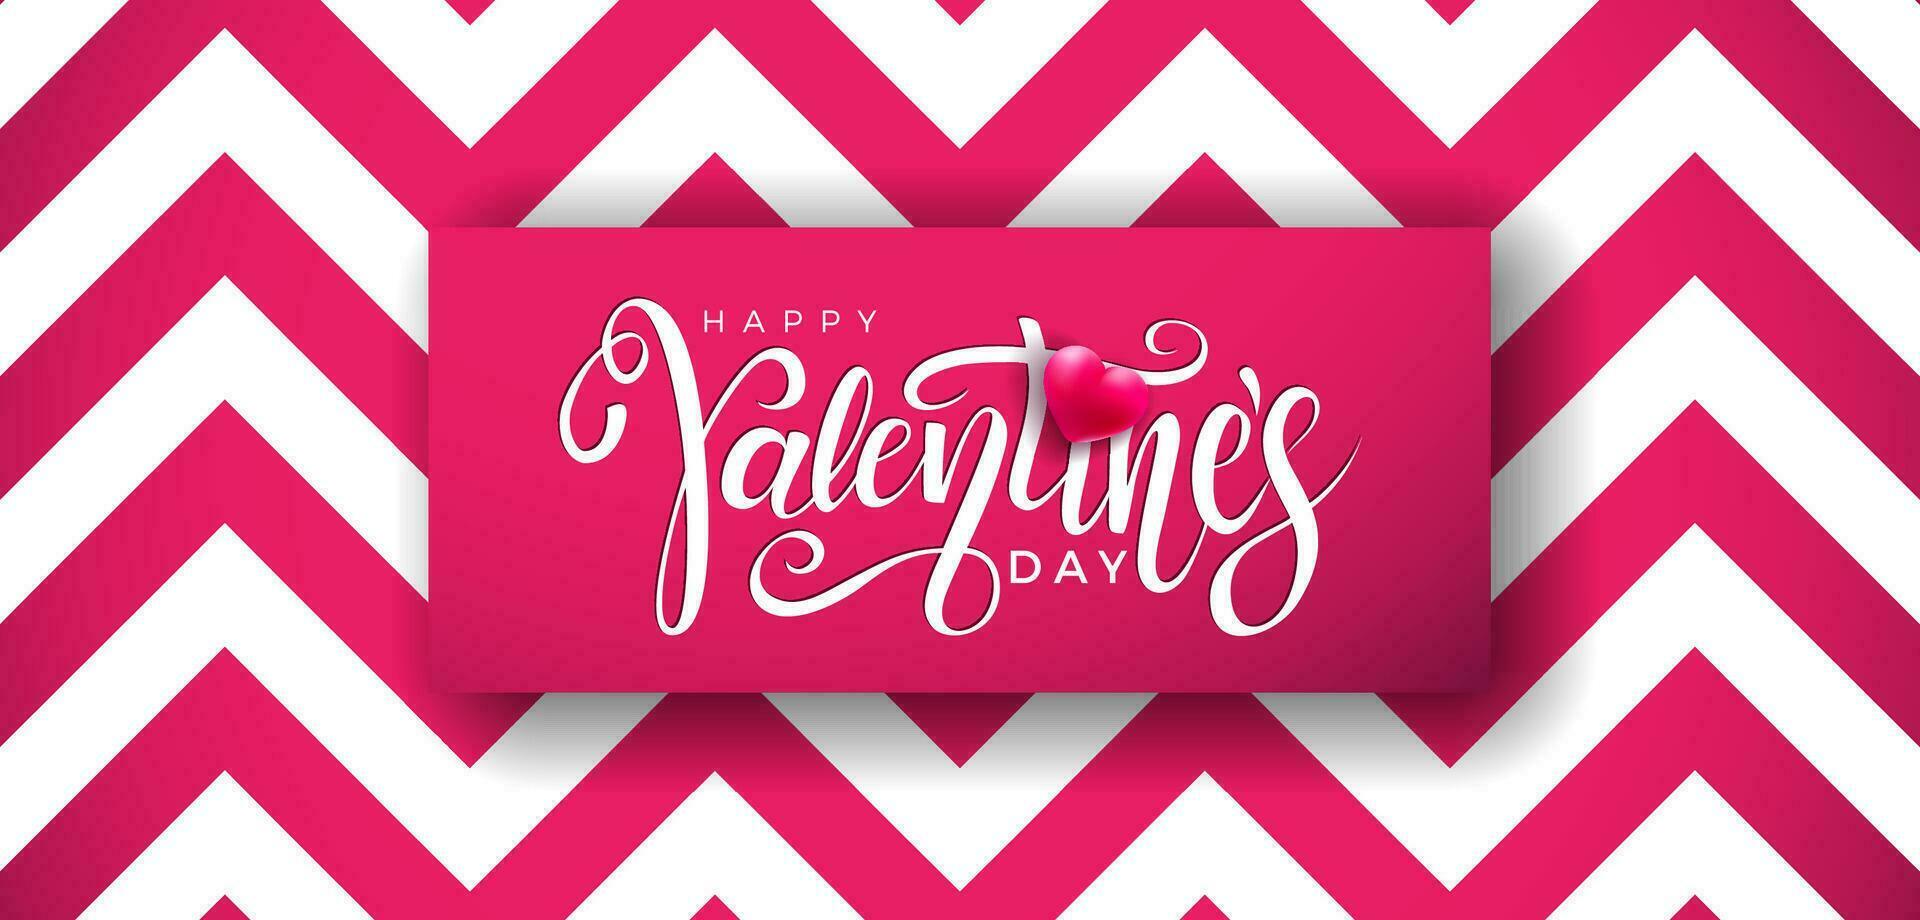 Happy Valentines Day Design with Red Heart on Shiny Violet Background. Vector Wedding and Love Theme Illustration for Holiday Greeting Card, Party Invitation or Promo Banner.